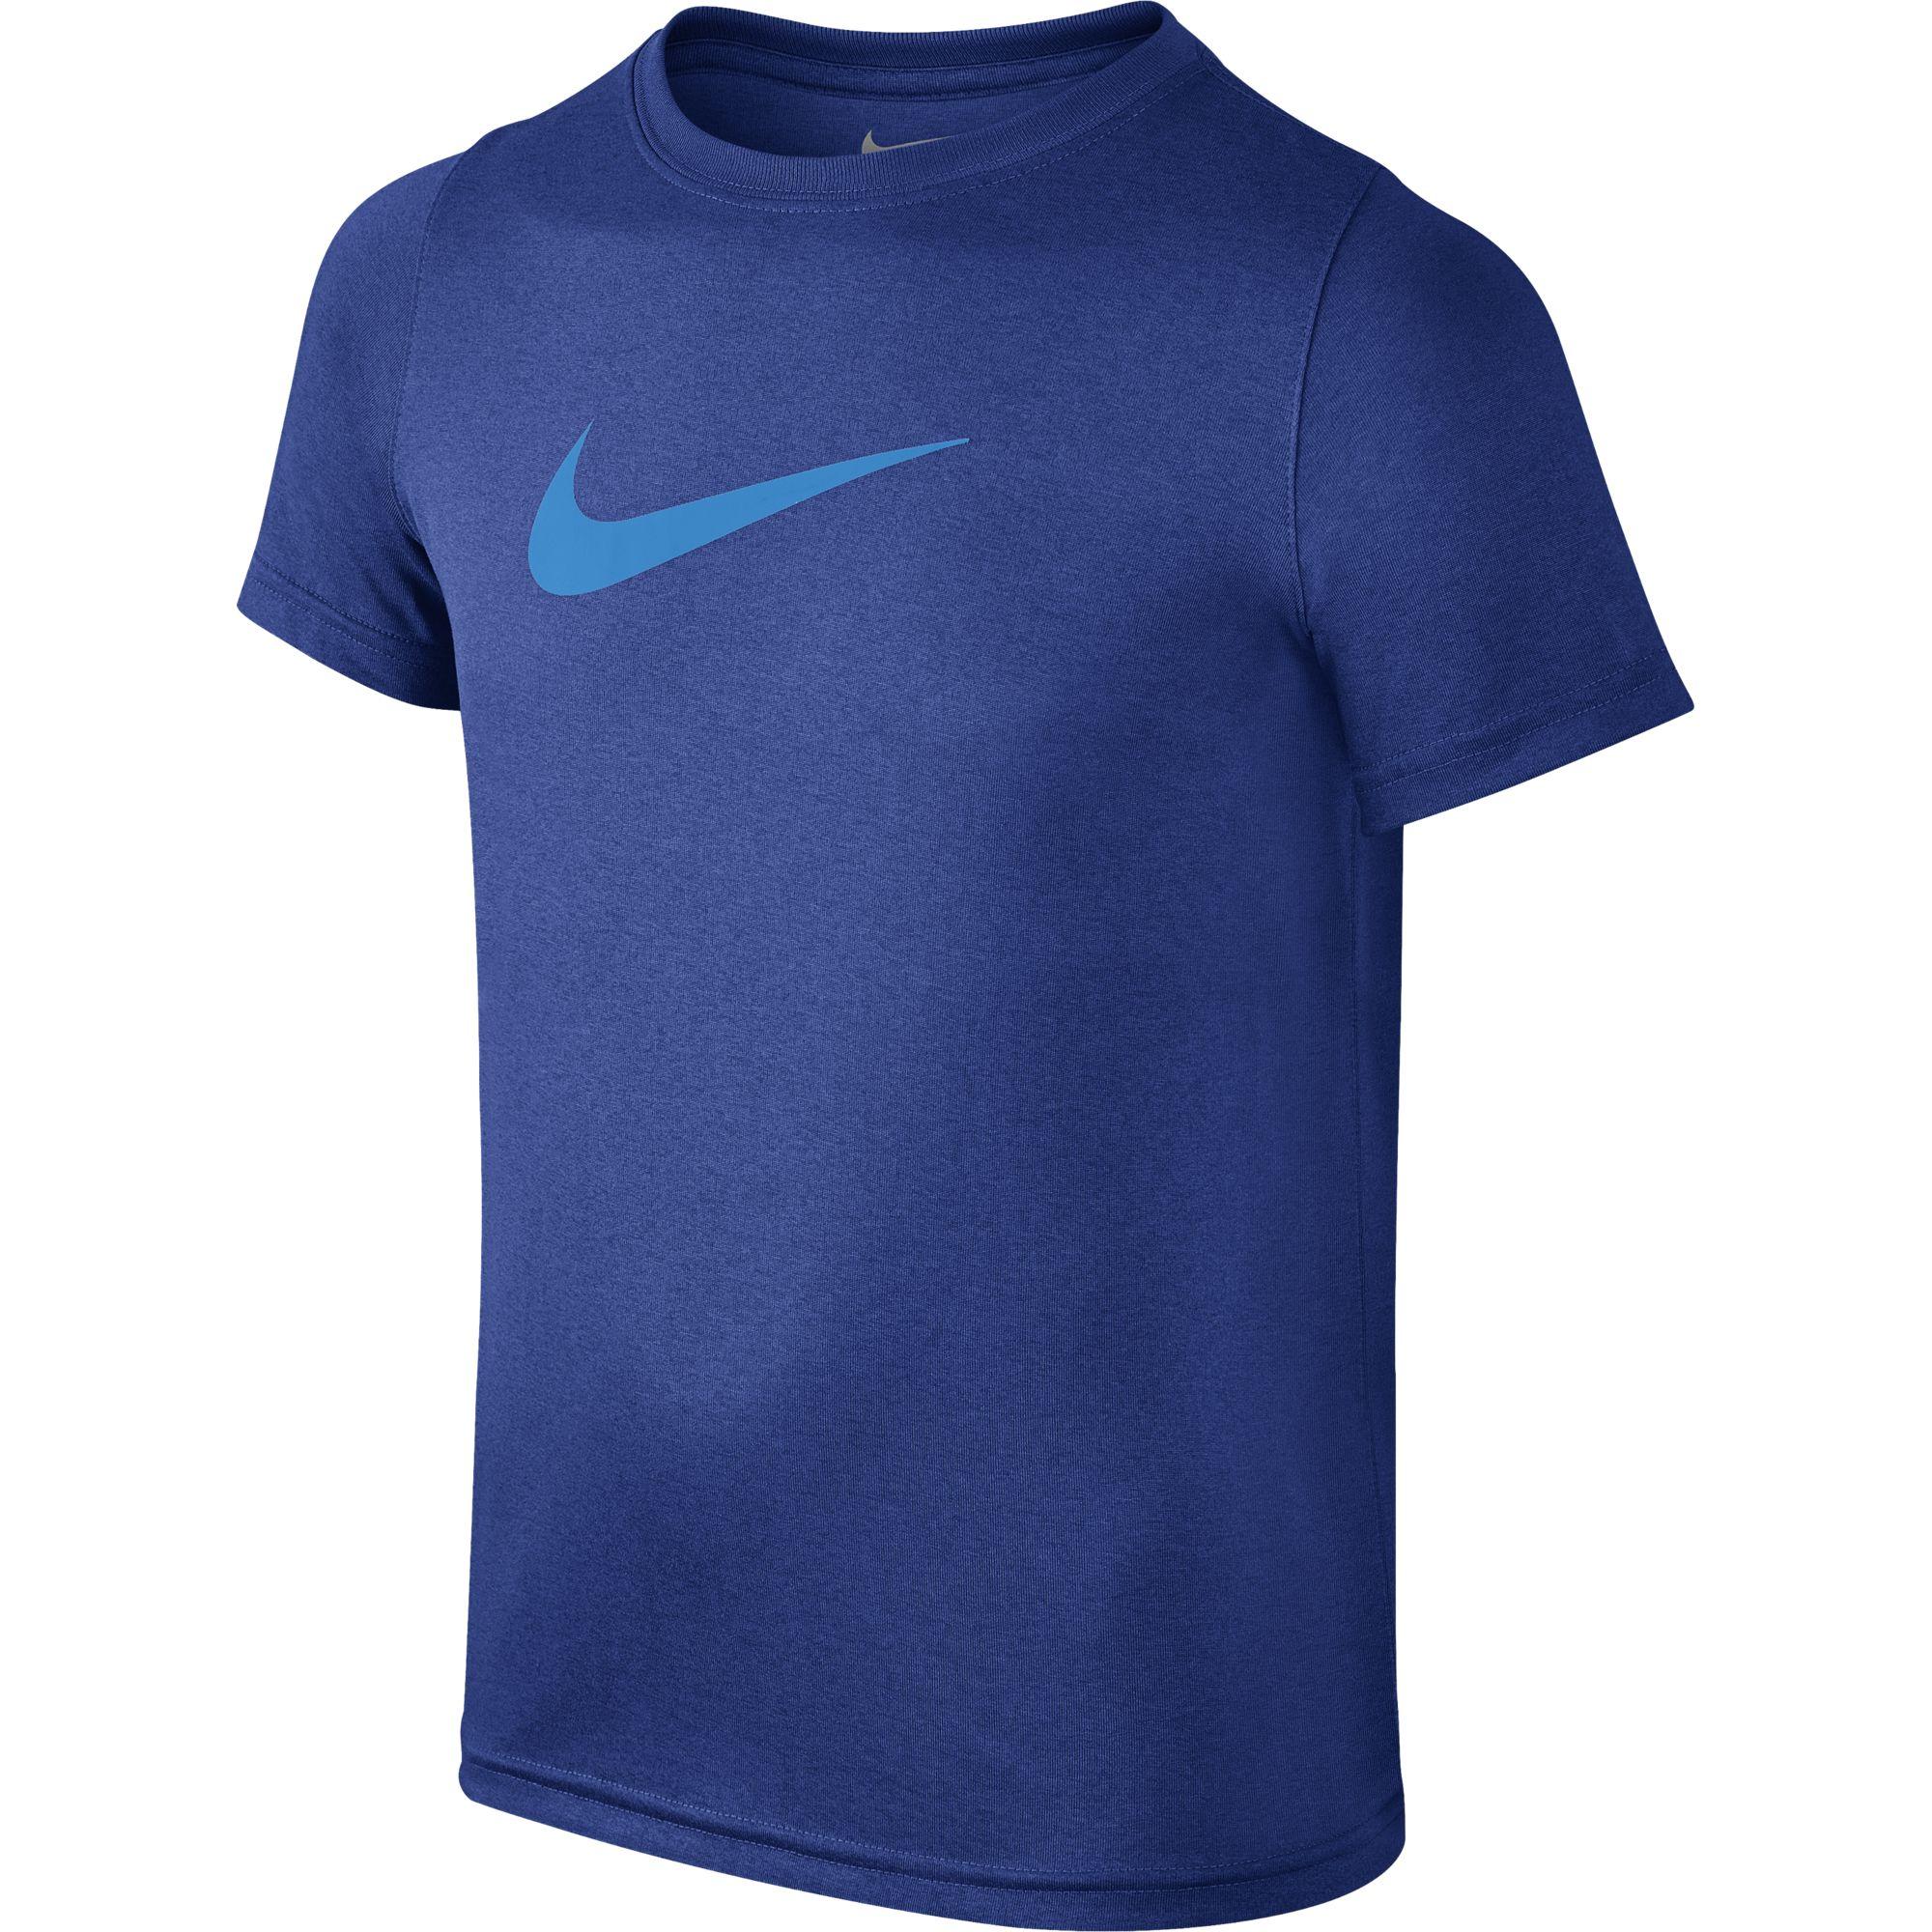 Sports T-shirt with user name